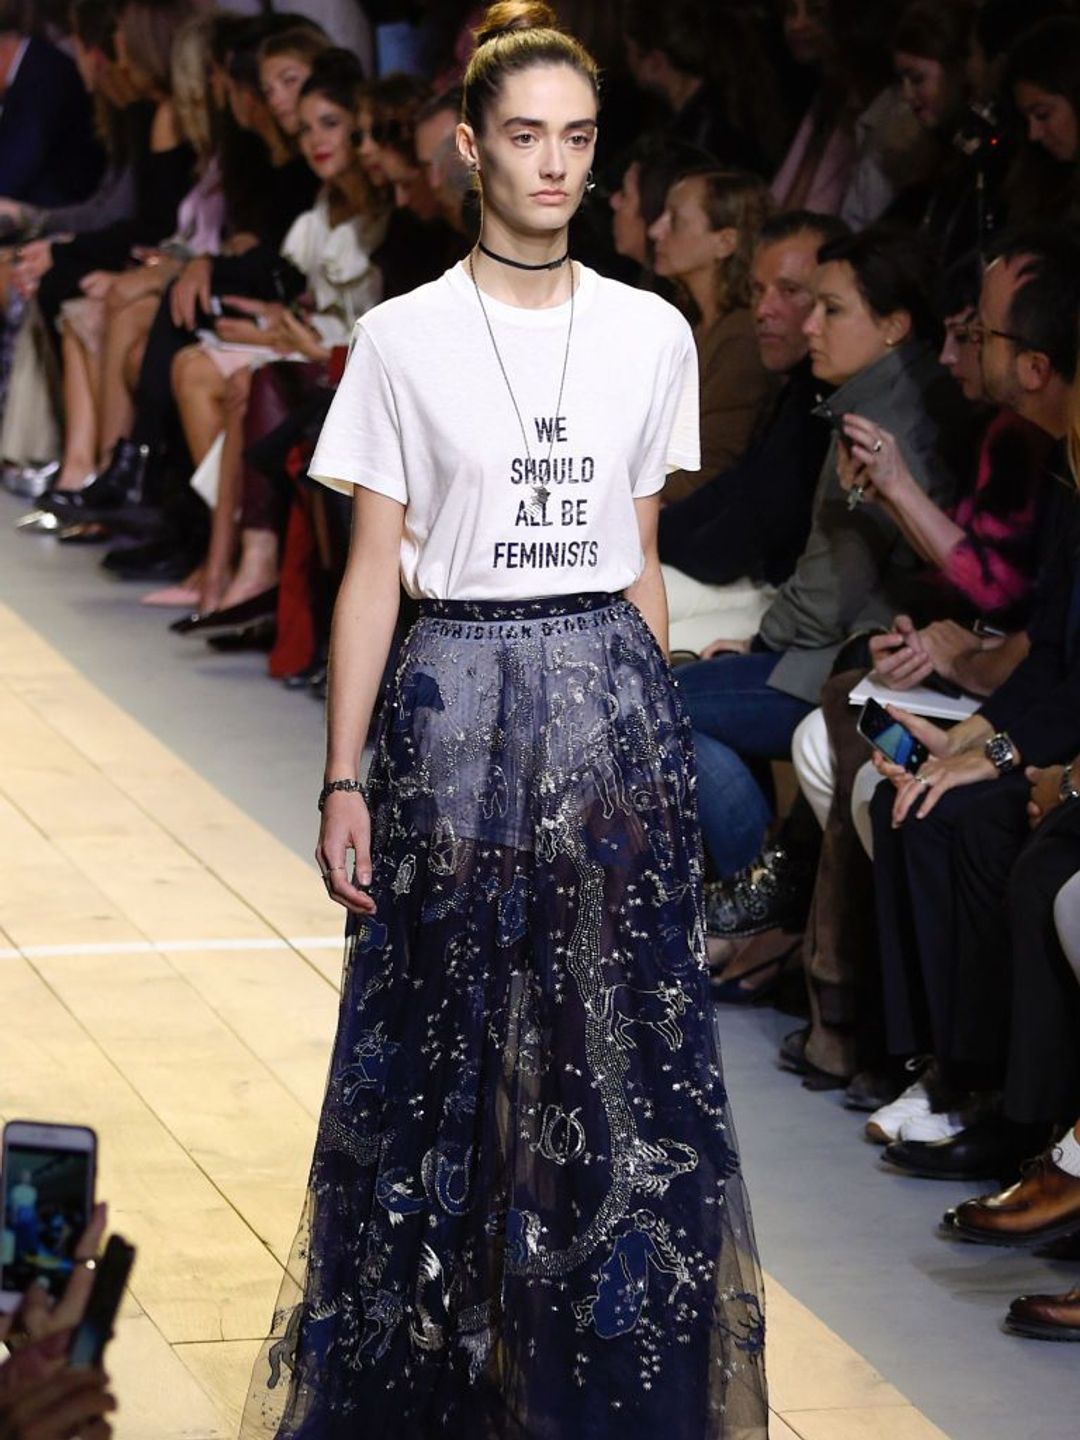 Dior model wears a "we should all be feminists" shirt on the runway in 2017